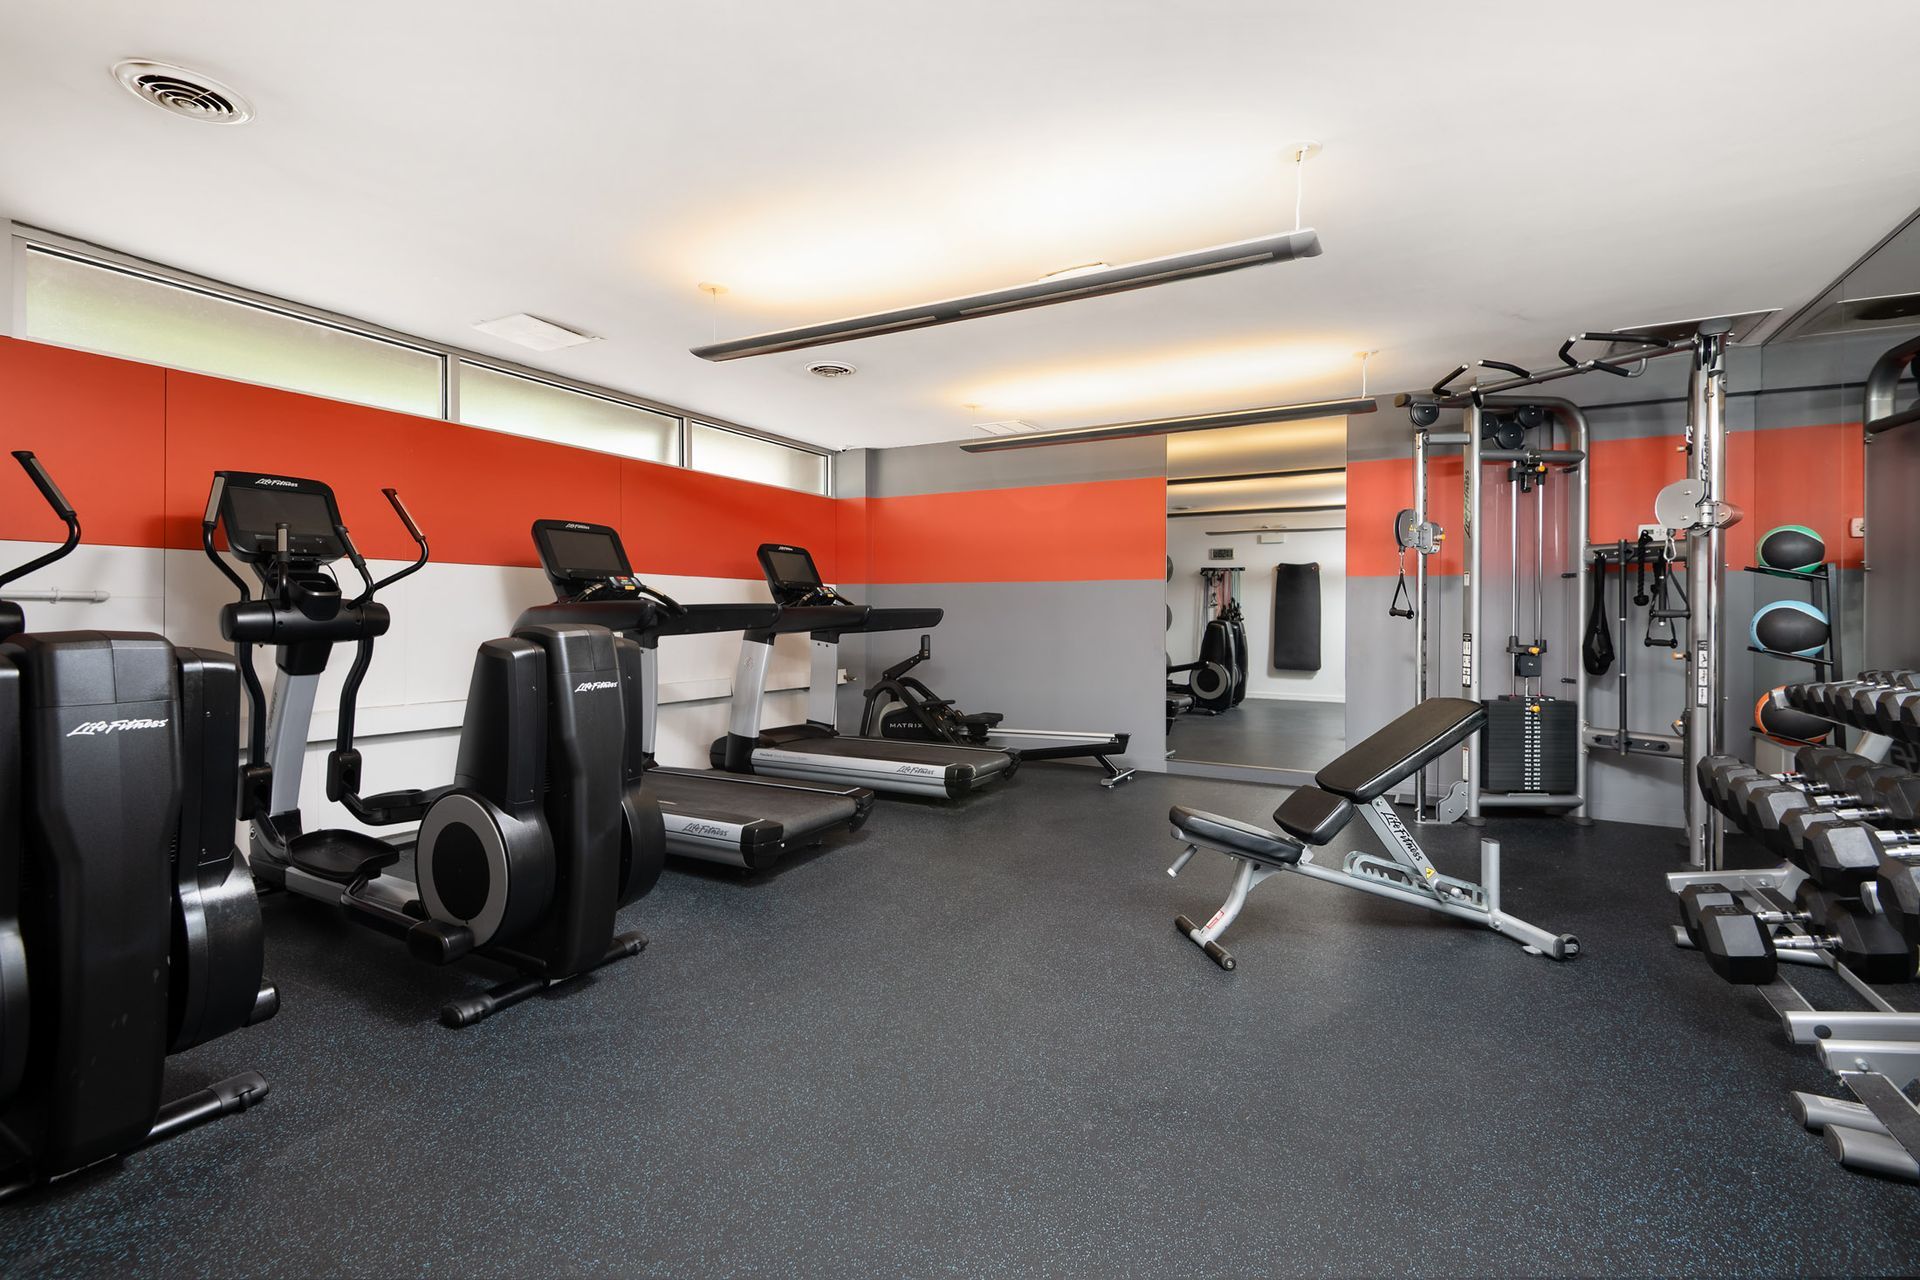 A gym with a lot of exercise equipment including treadmills and ellipticals at Reside on North Park.